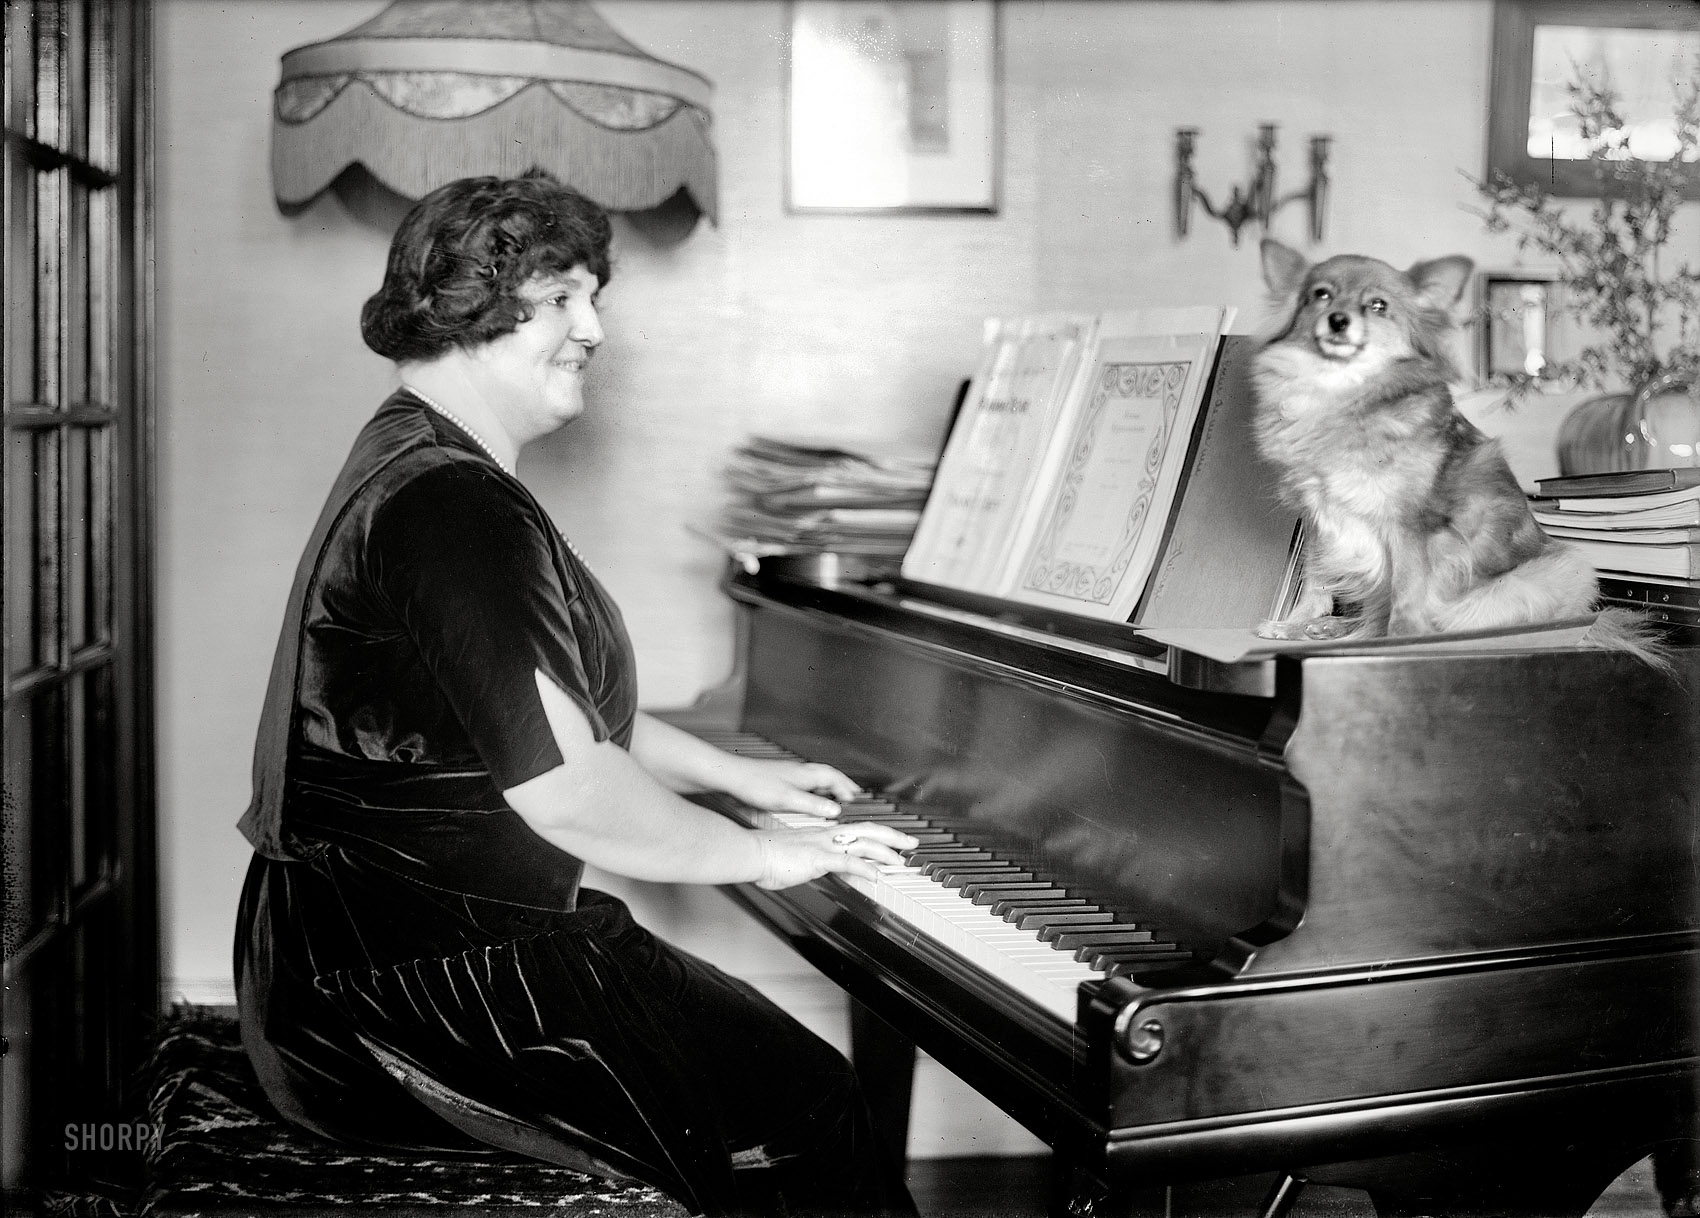 The singer Elsie Baker and canine accompanist in New York circa 1920. 5x7 glass negative, George Grantham Bain Collection. View full size.